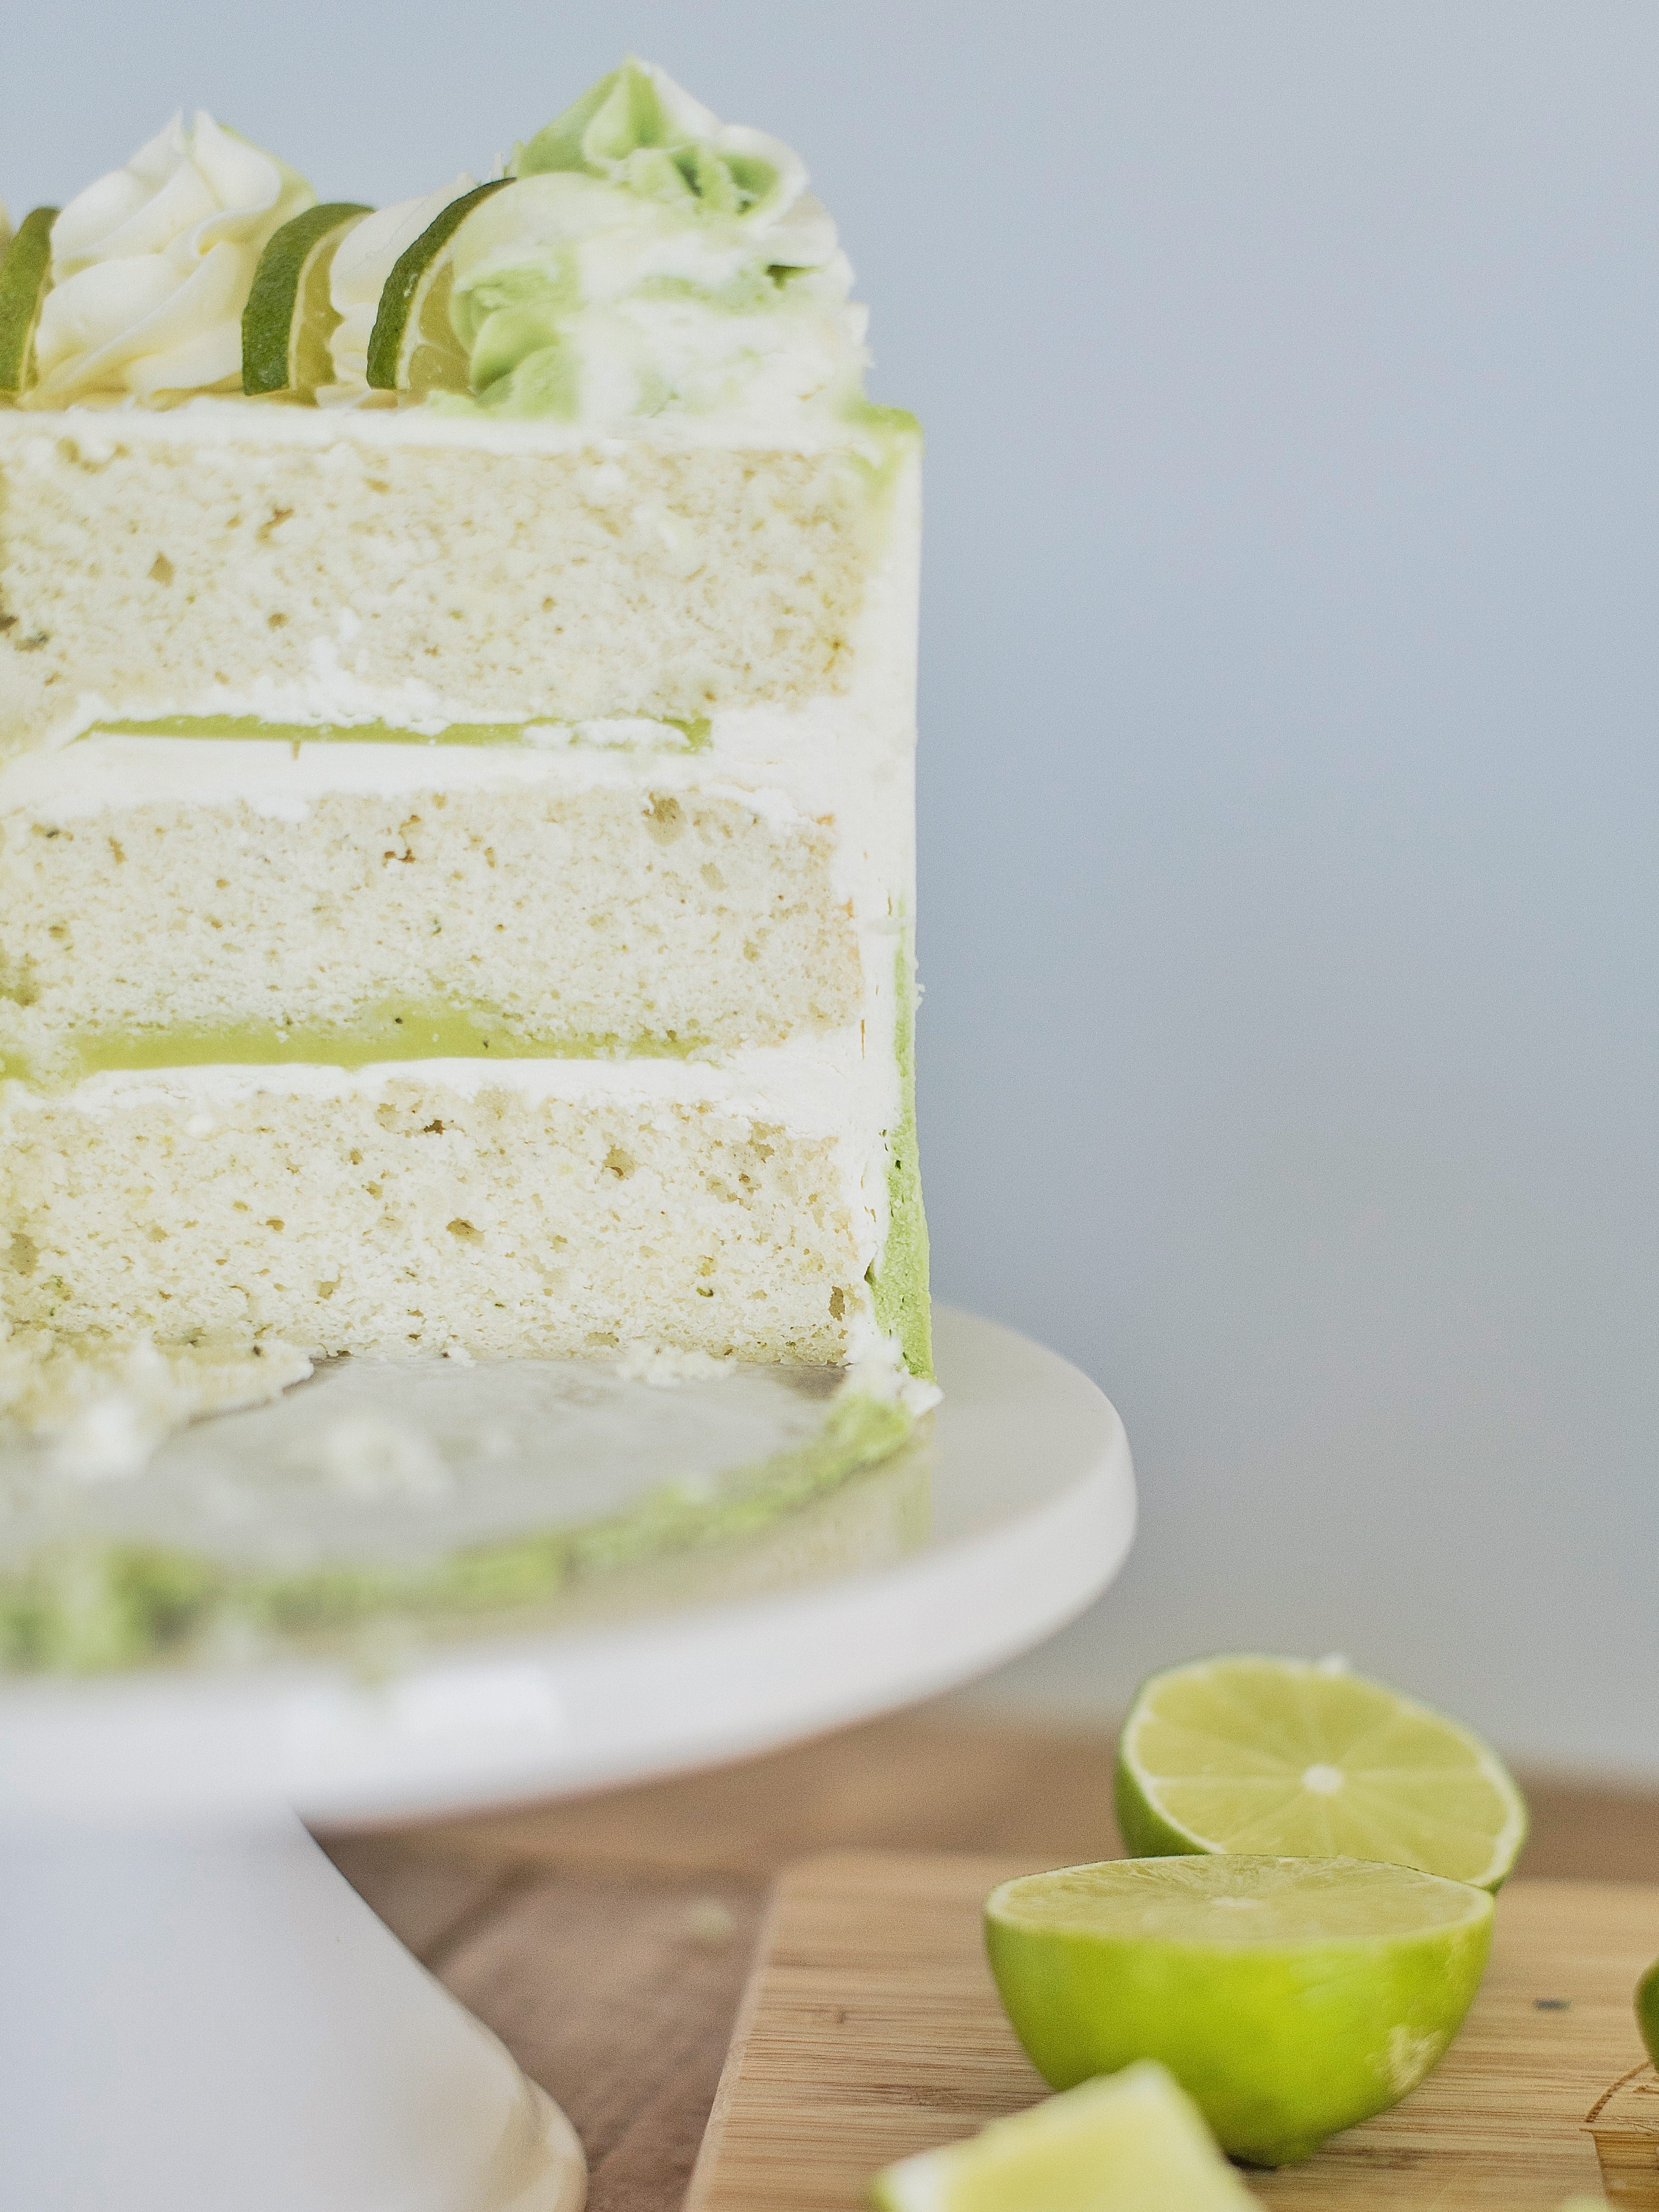 Mojito Cake: tender and fluffy white cake layers infused with lime and mint, with a lime curd and mint buttercream. #cakebycourtney #mojitocake #summercake #cake #cakerecipe #easycakerecipe #mojito